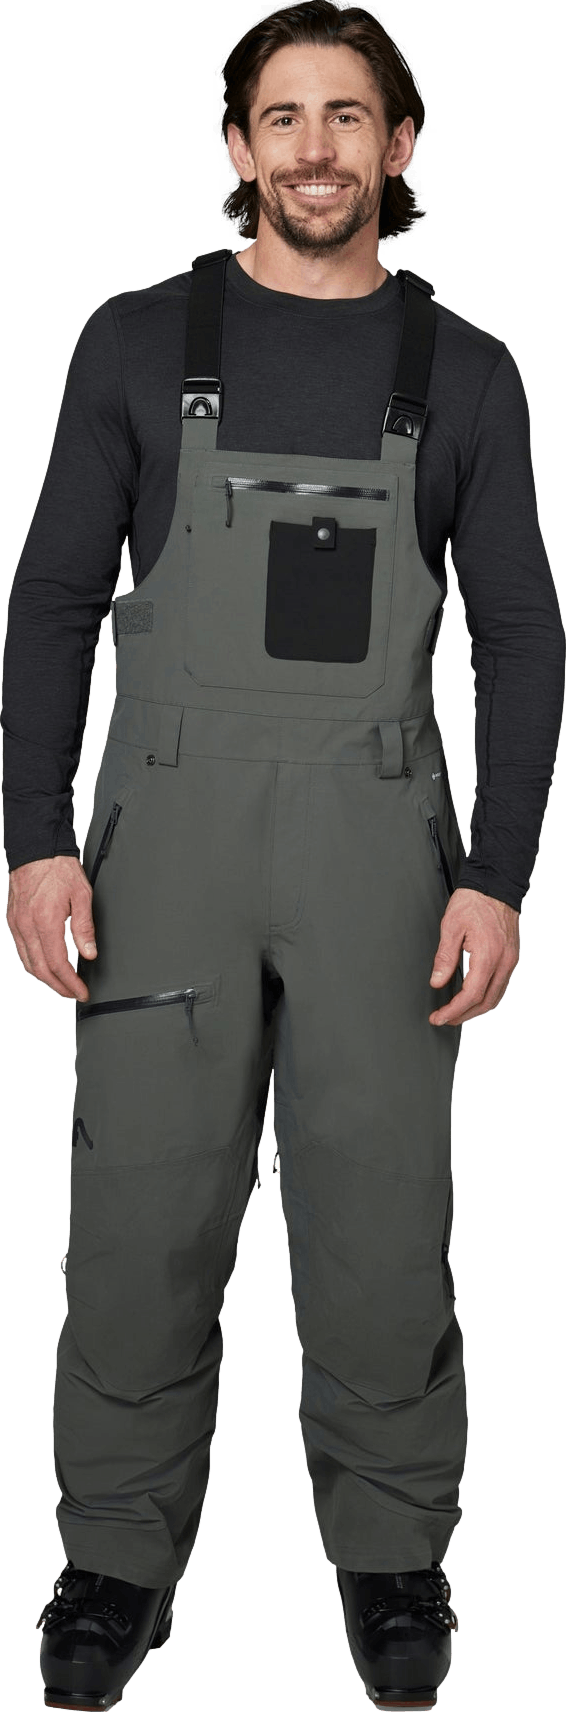 Men's Firefall/2™ Insulated Pant